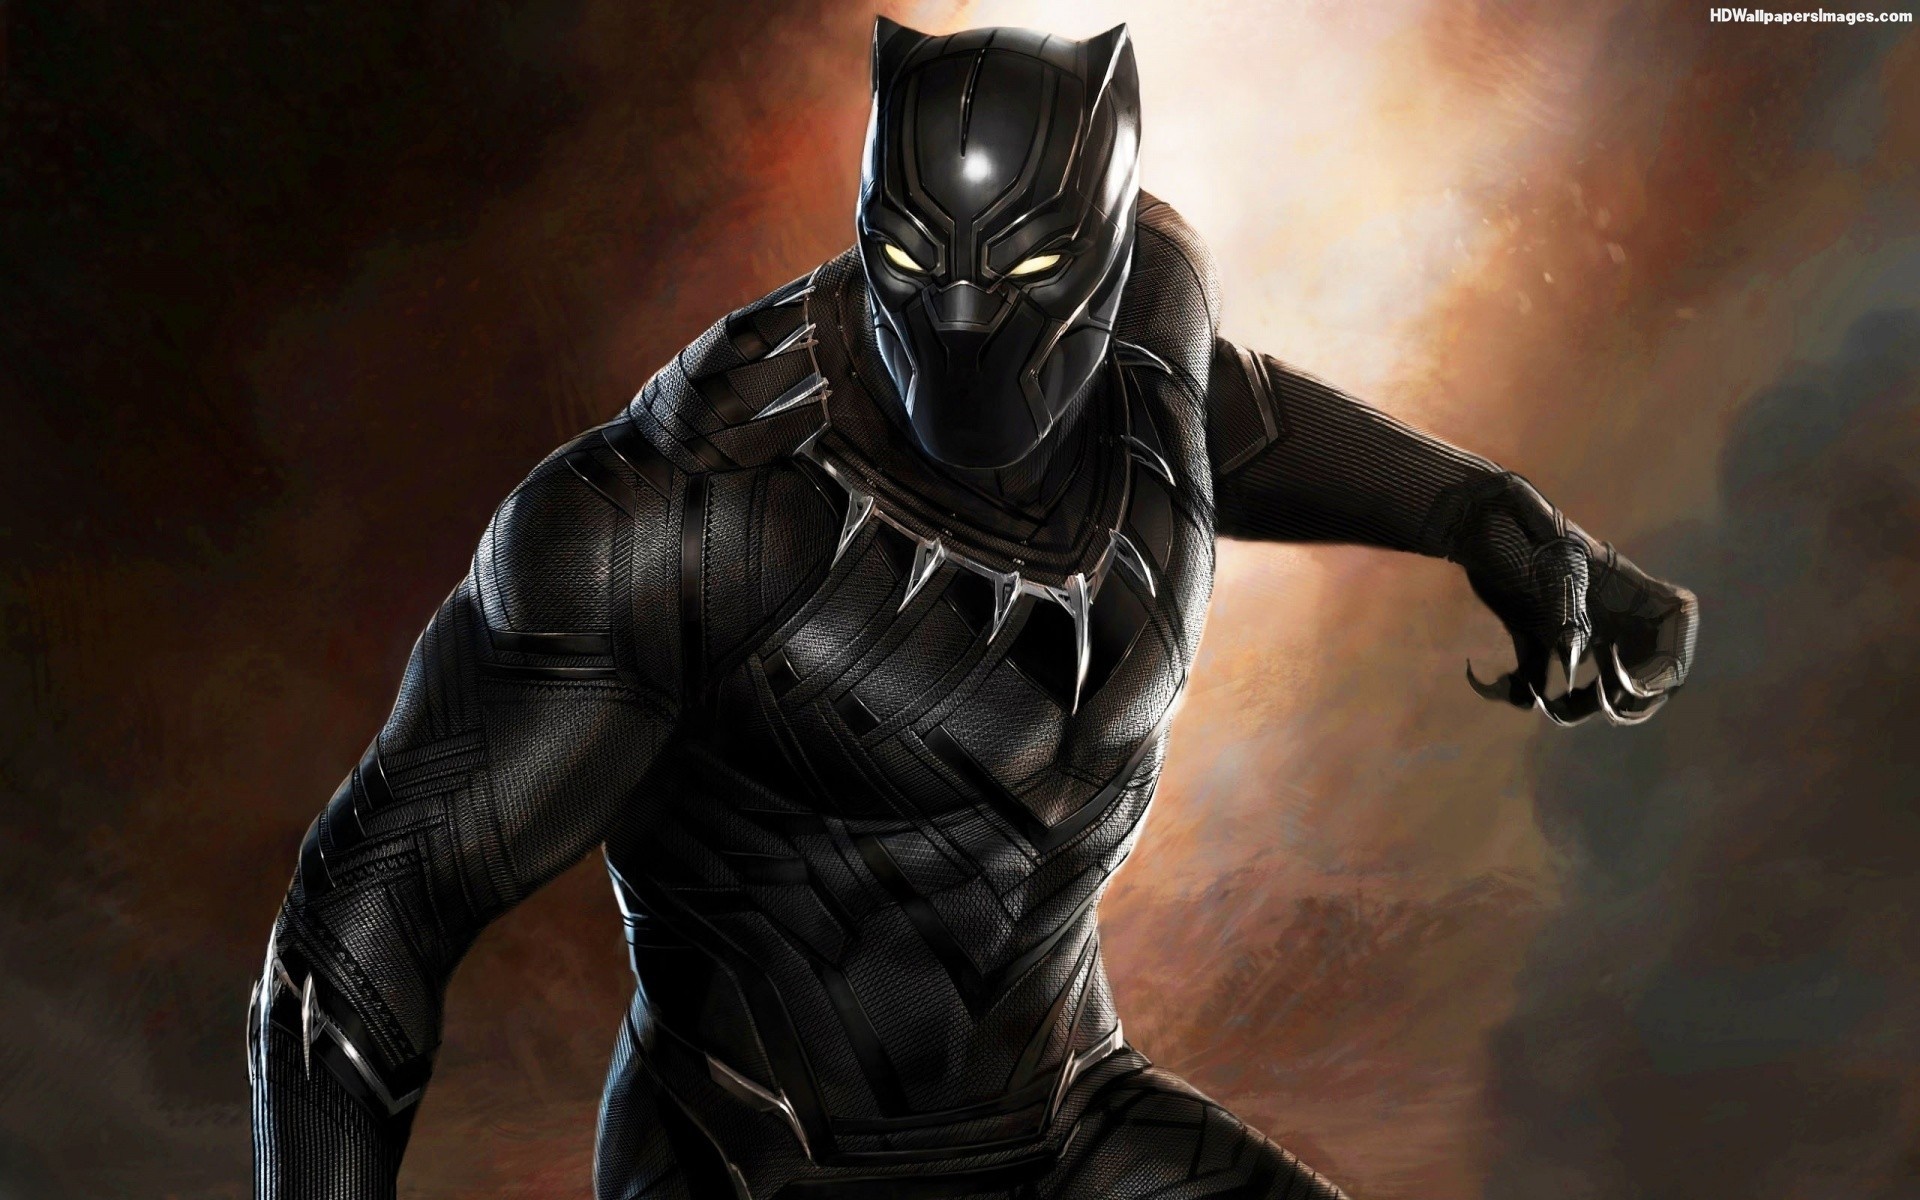 Black Panther wallpaper ·① Download free amazing HD backgrounds for desktop computers and